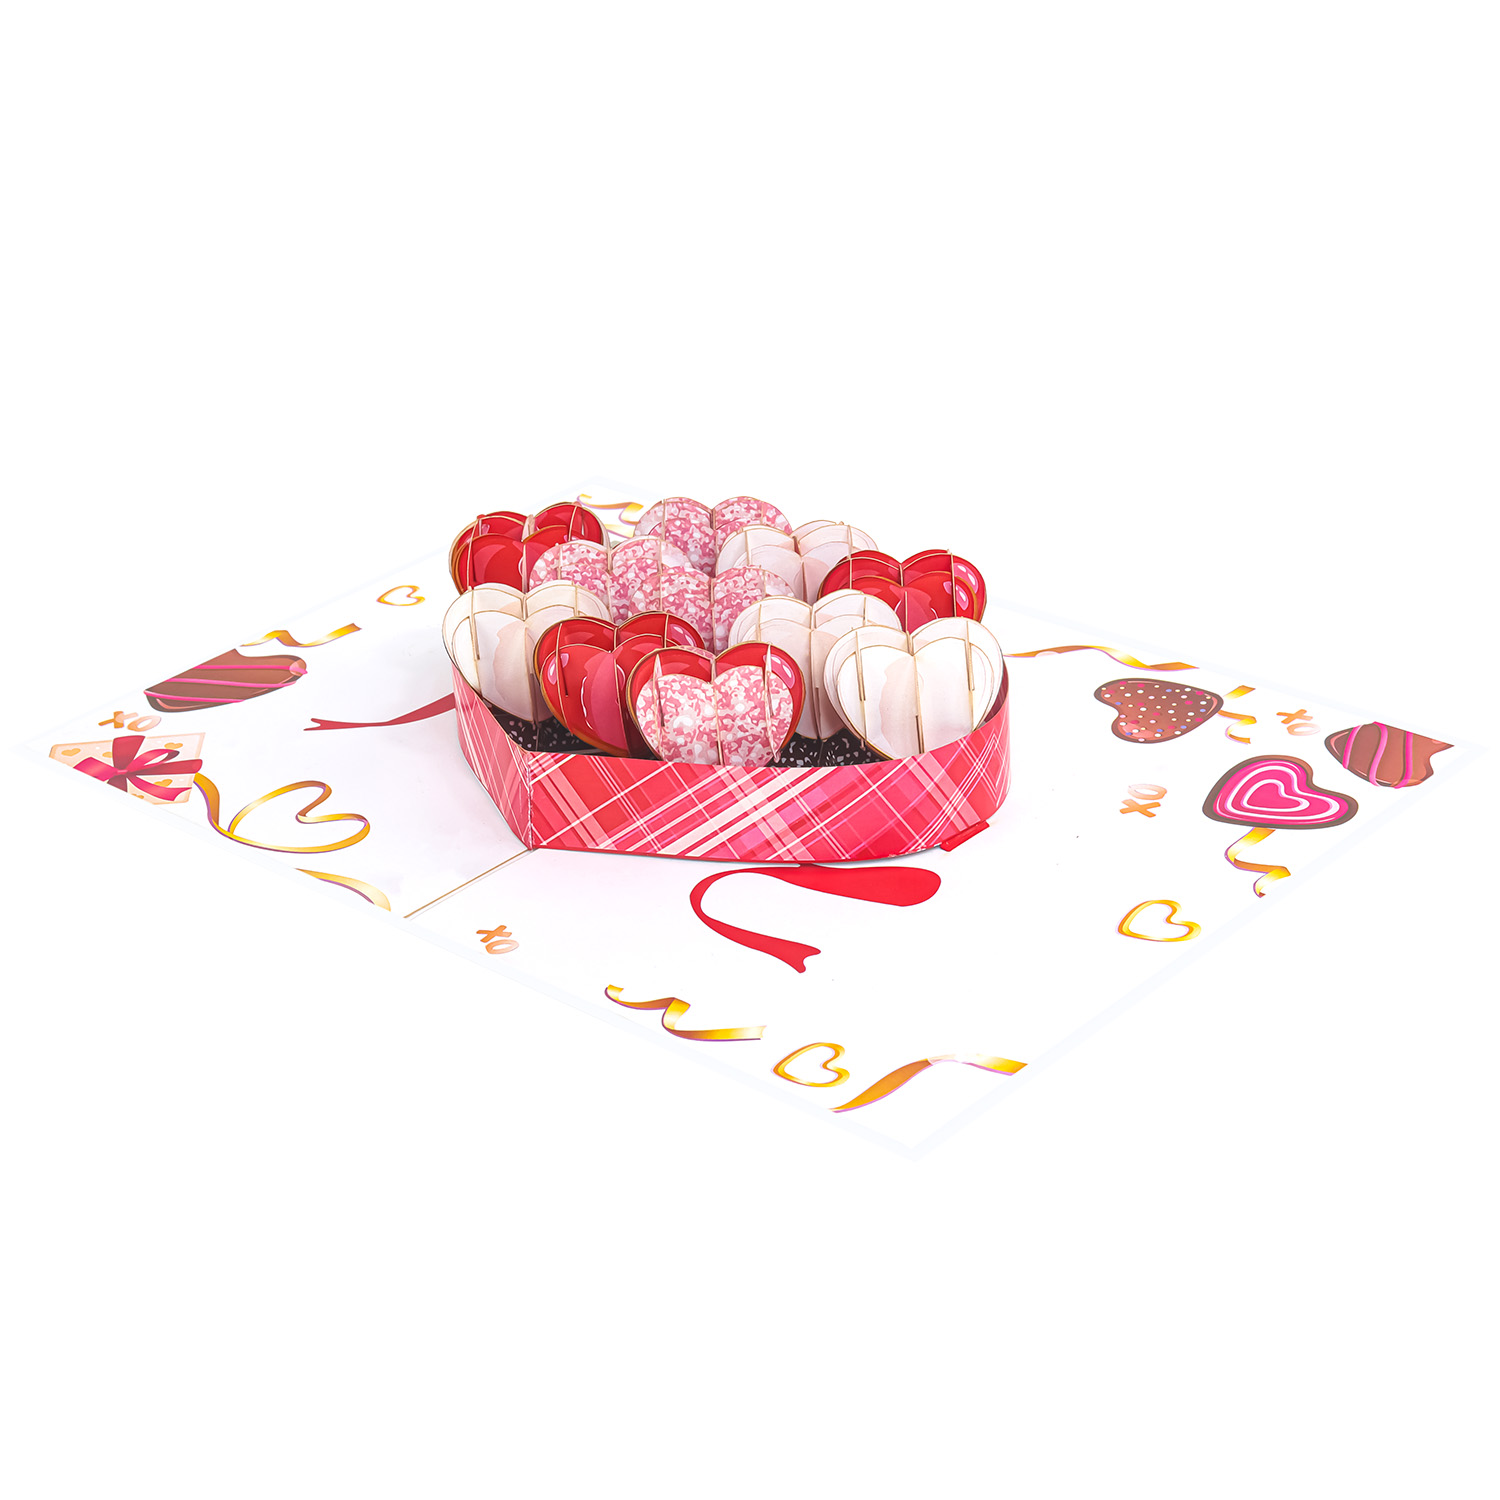 Valentine-Heart-Chocolate-Pop-Up-Card-LV64-overview-pop-up-card-wholesale-manufacturer-valentines-day-pop-up-card-flower-pop-up-card-teddy-3d-pop-up-greeting-card-3.jpg